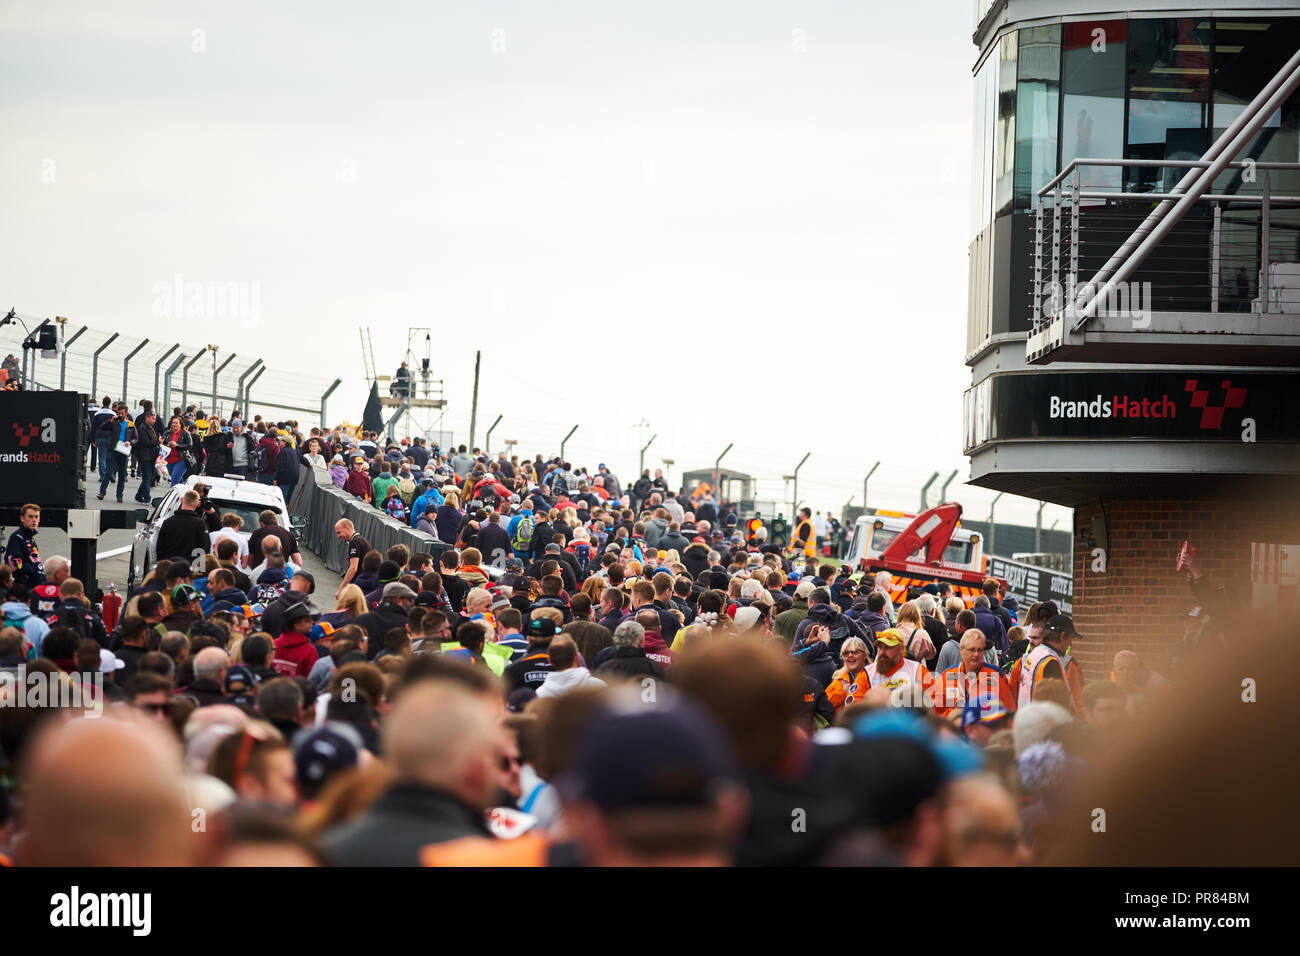 Longfield, Kent, UK, 30th September 2018. BTCC crowd during Autograph Sessionof the Dunlop MSA British Touring Car Championship at Brands Hatch Grand Prix Circuit. Photo by Gergo Toth / Alamy Live News Stock Photo